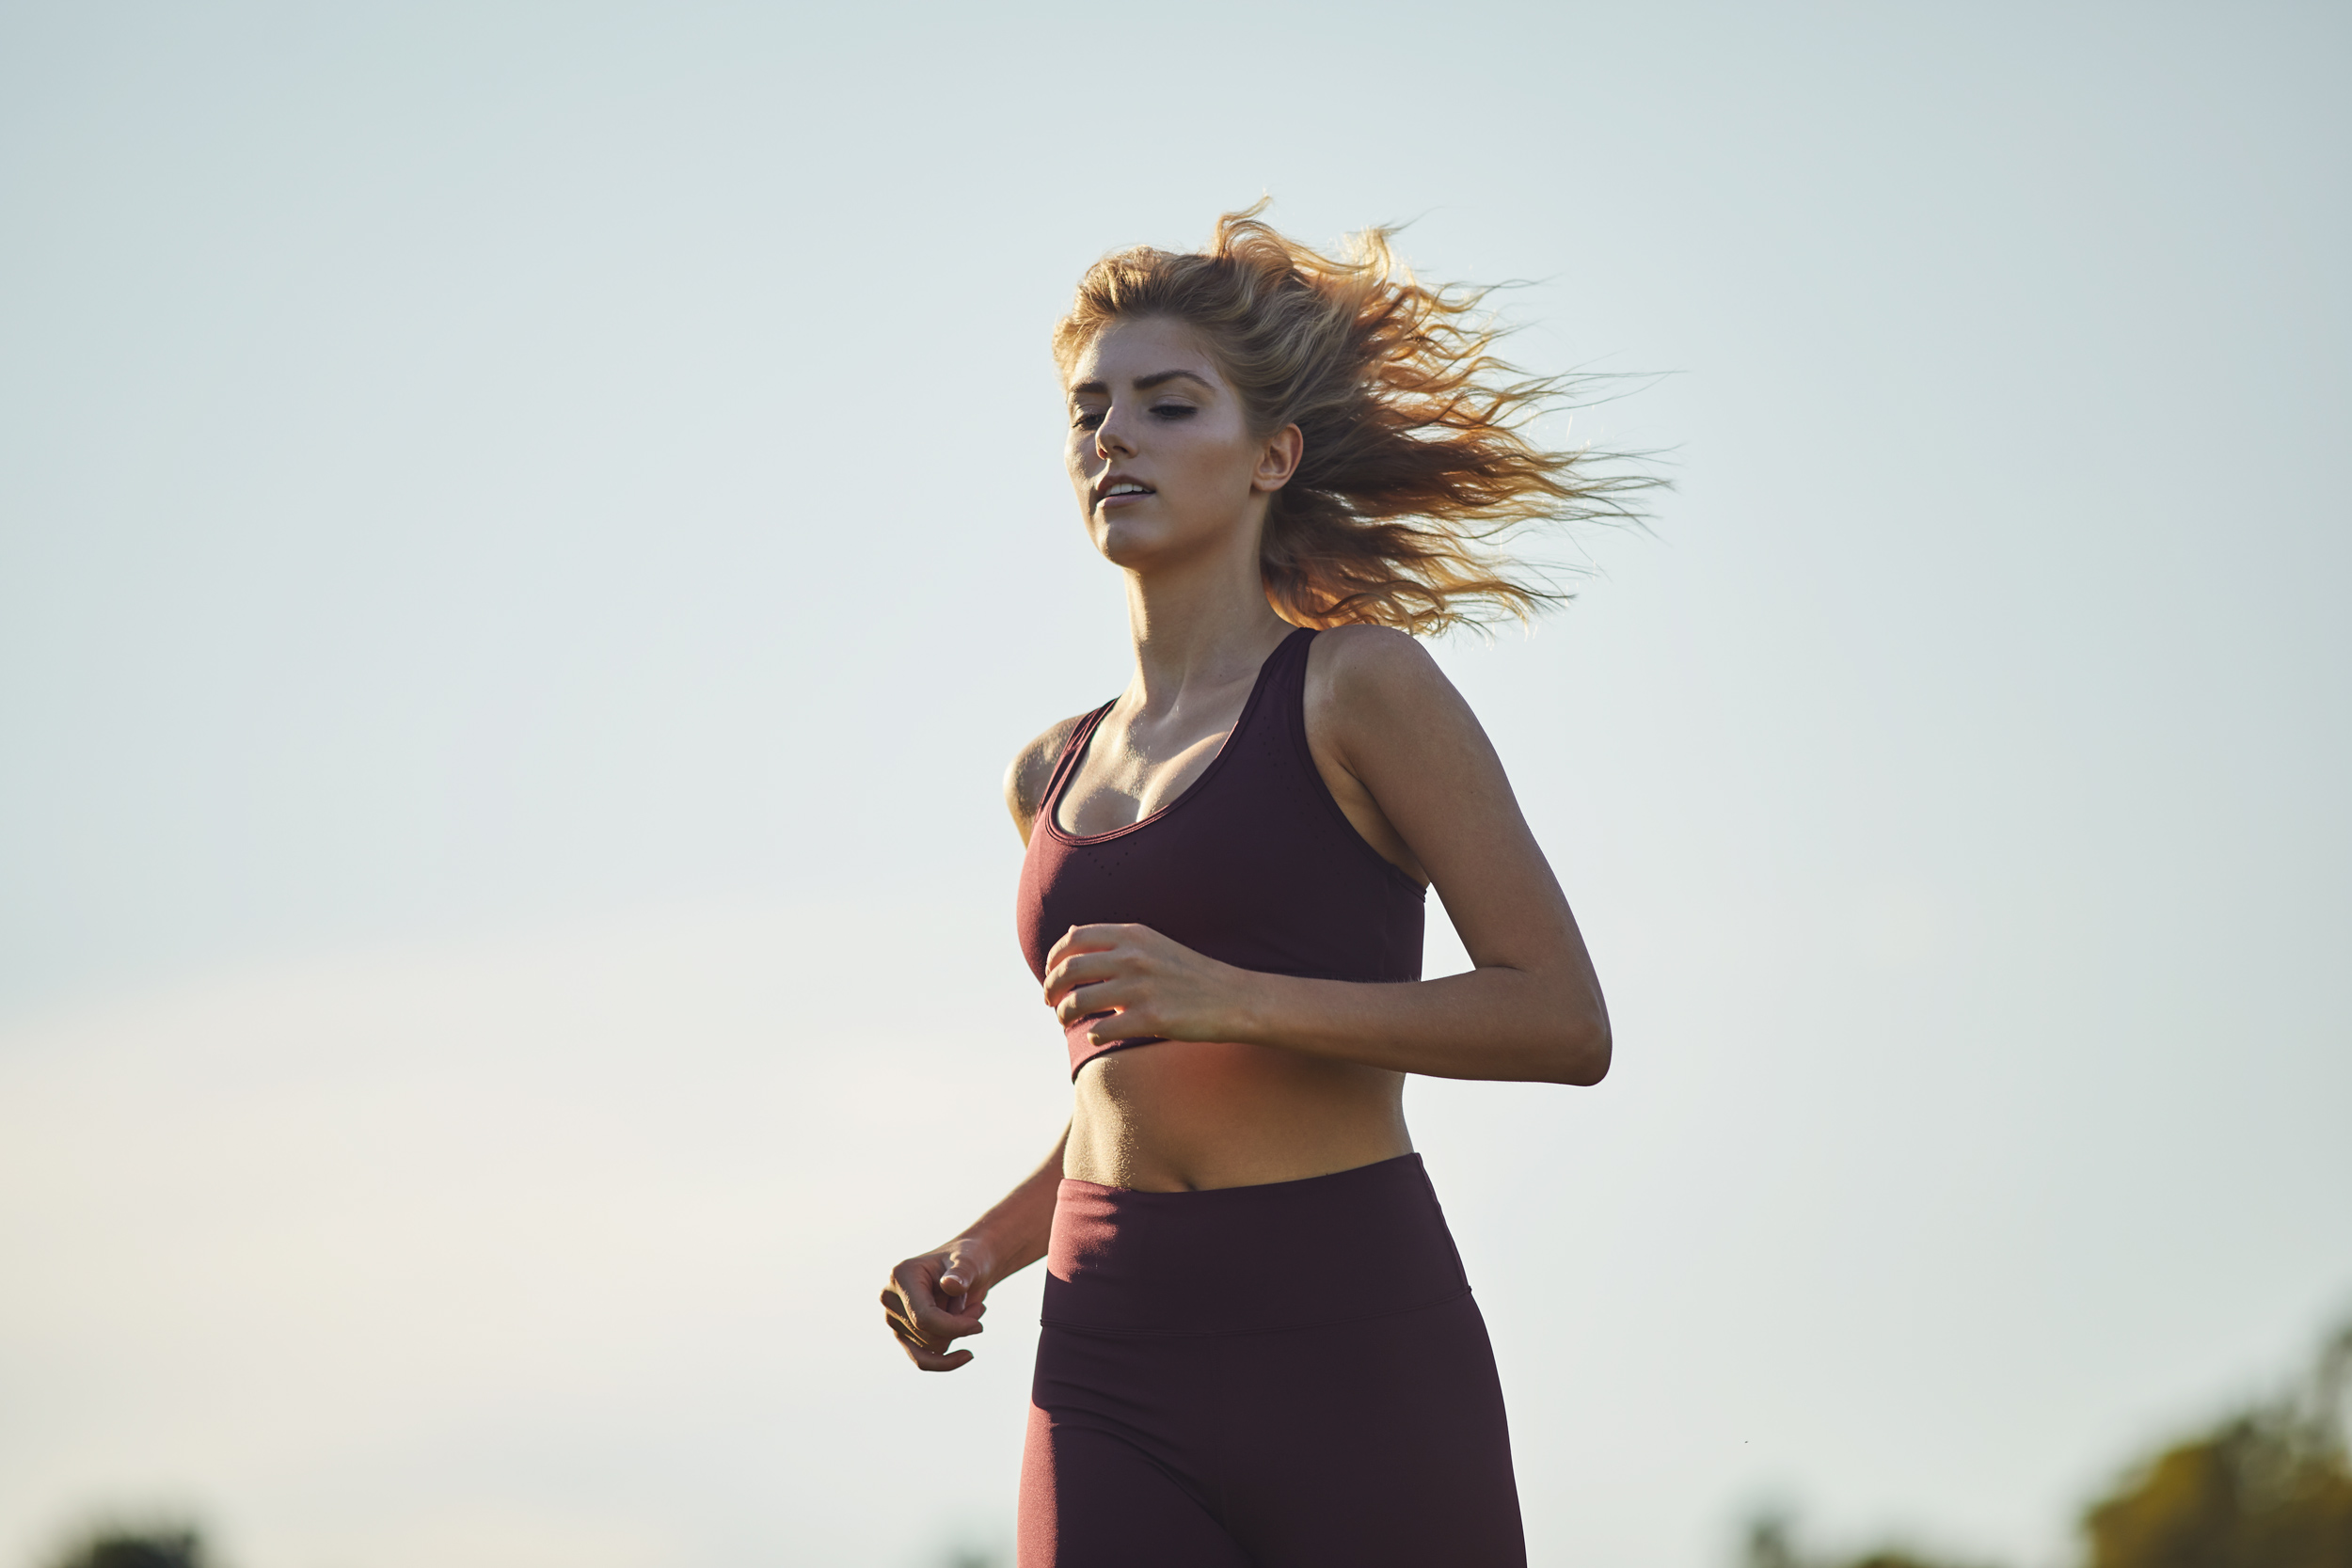 woman-running-hair-flowing-washington-dc-commercial-photography